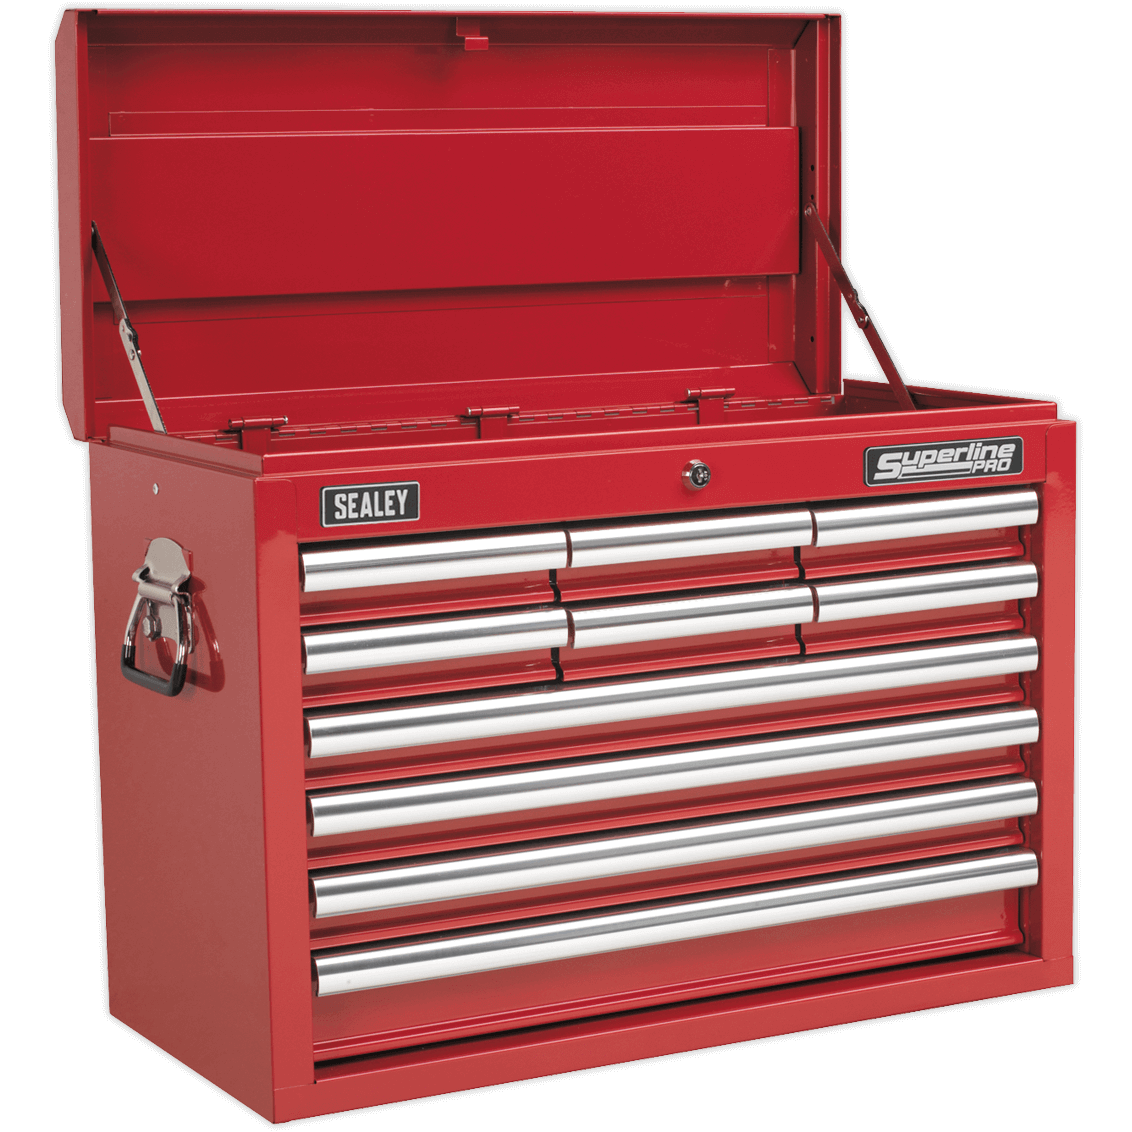 Sealey Superline Pro 10 Drawer Heavy Duty Tool Chest Red